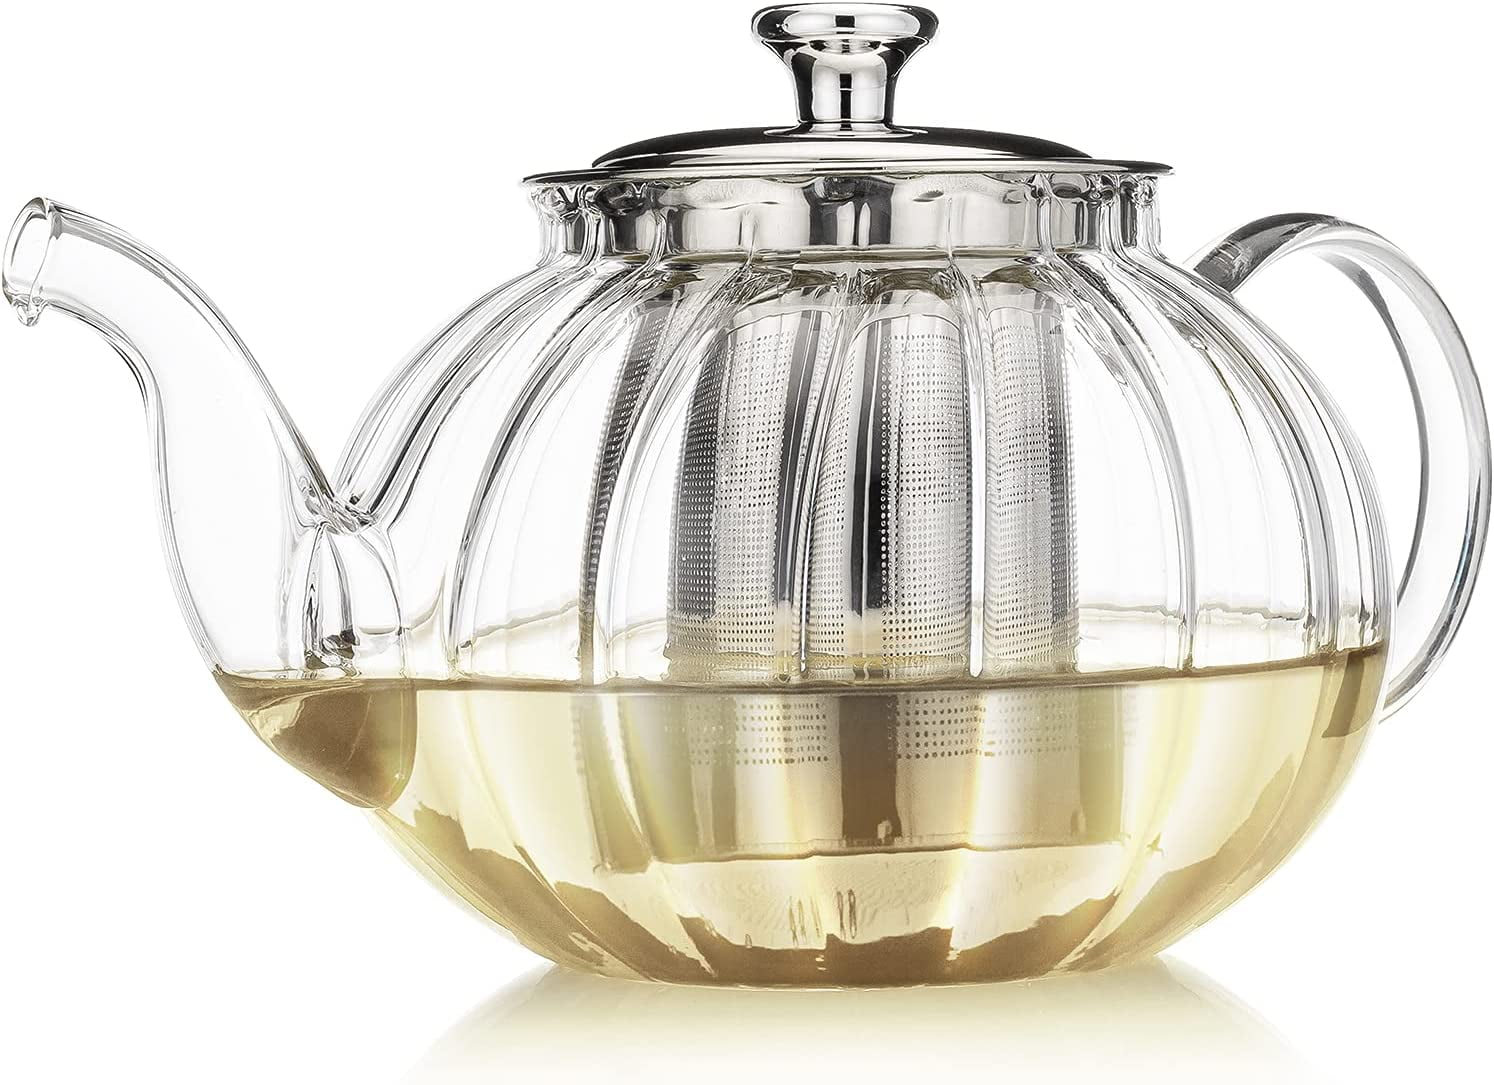 Teabloom Classica Everyday Teapot – Stovetop Safe Glass Teapot – 40 oz /  1200 ml Capacity – Removable Stainless Steel Infuser